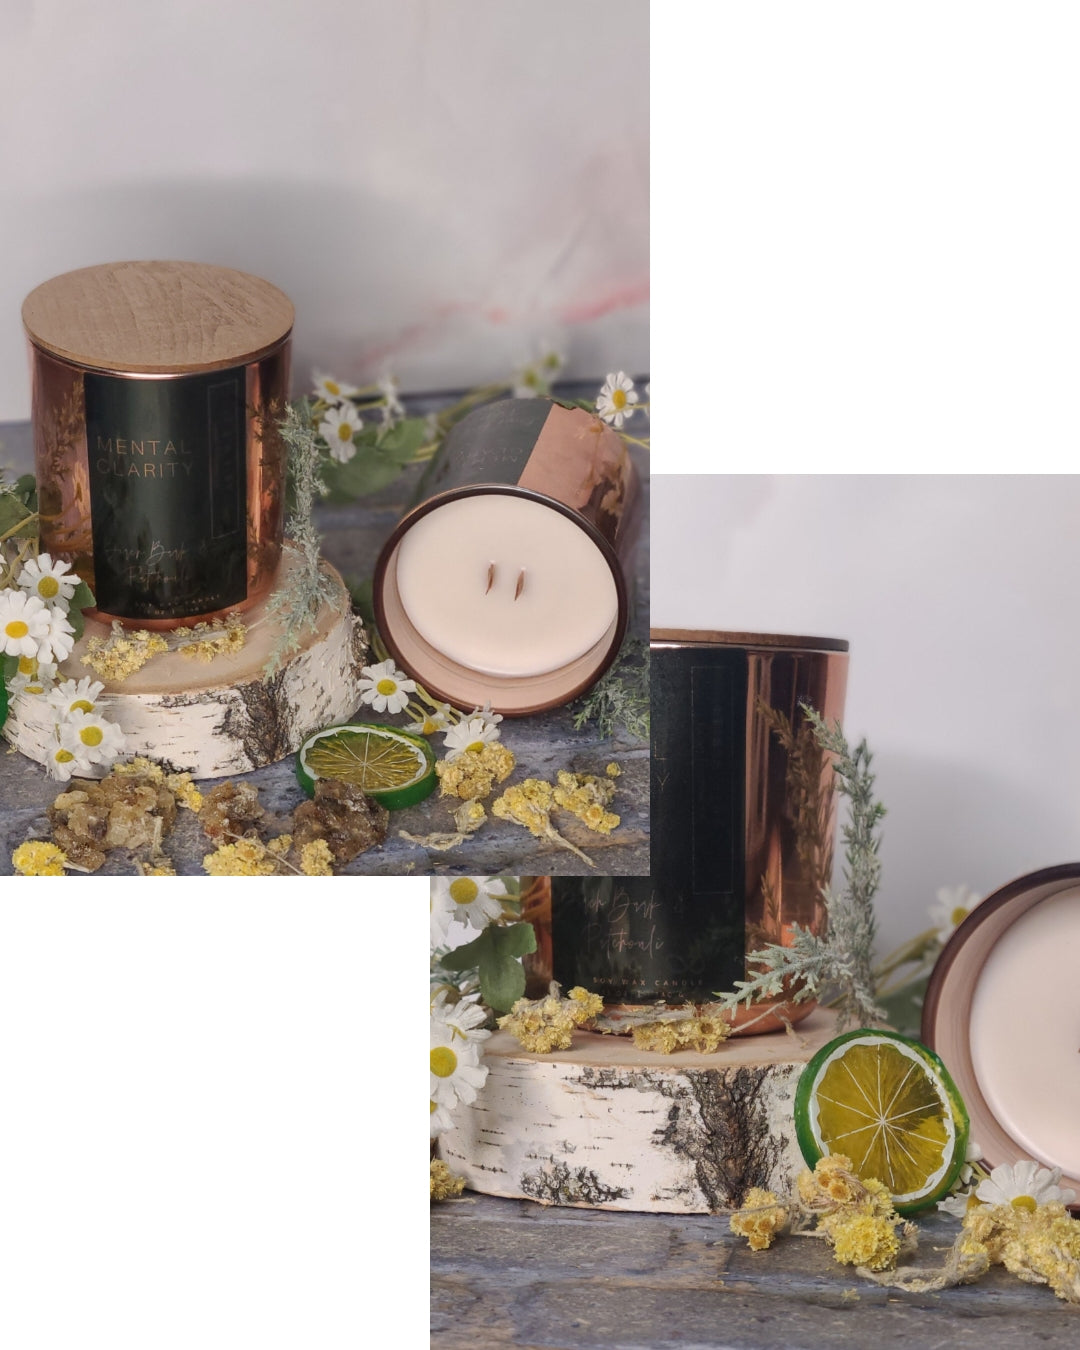 Mental Clarity - 12 oz Luxury Candle